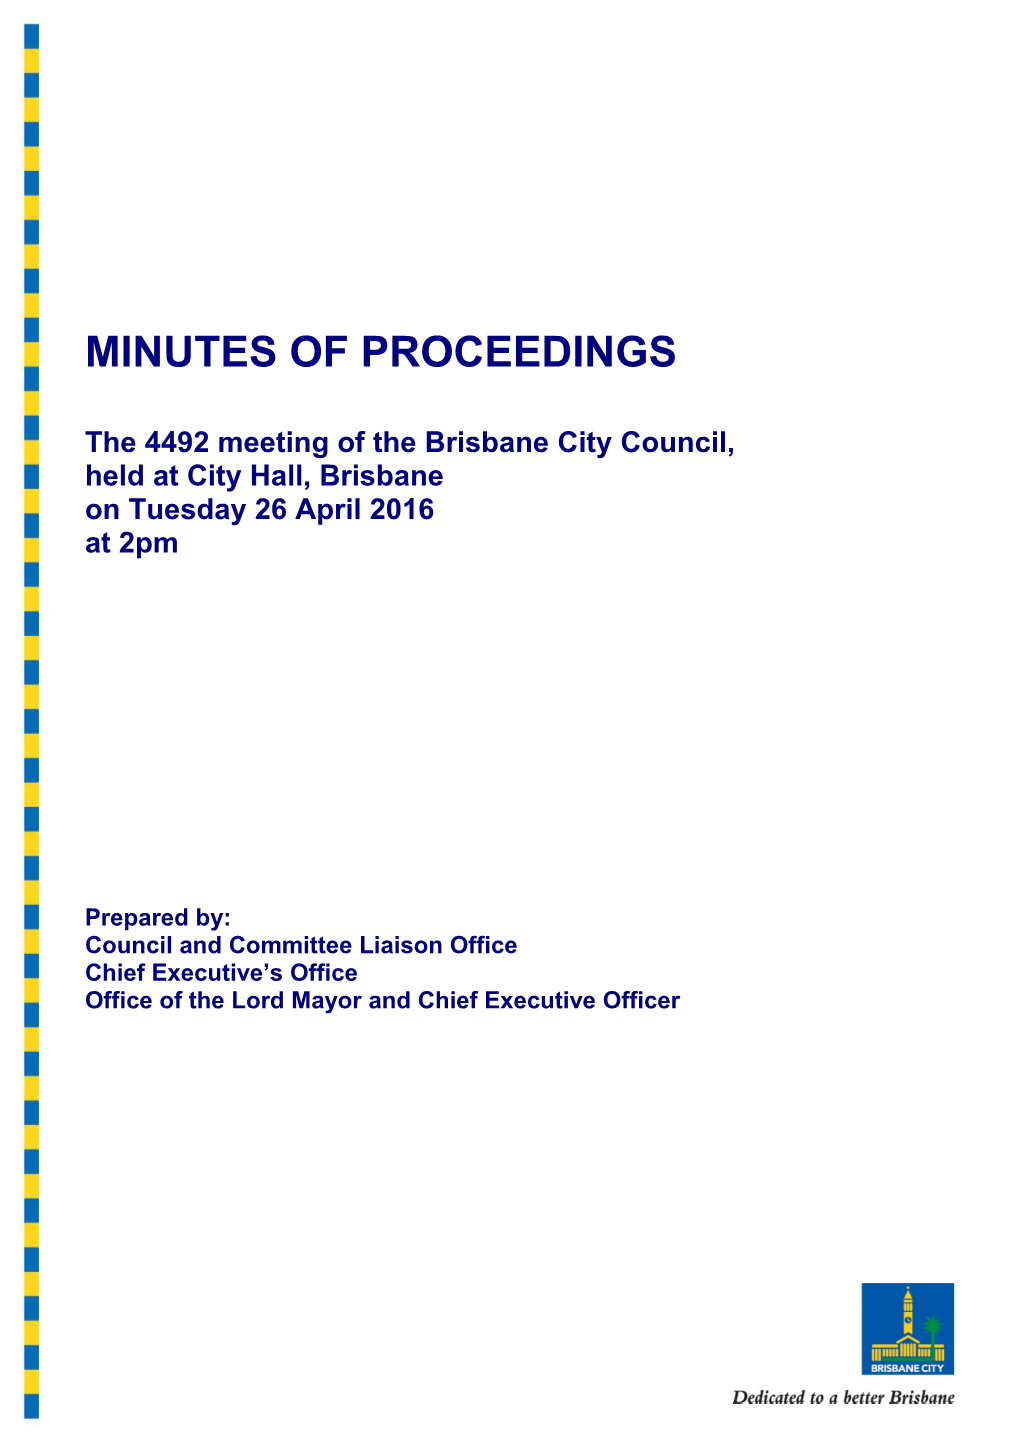 The 4492 Meeting of the Brisbane City Council